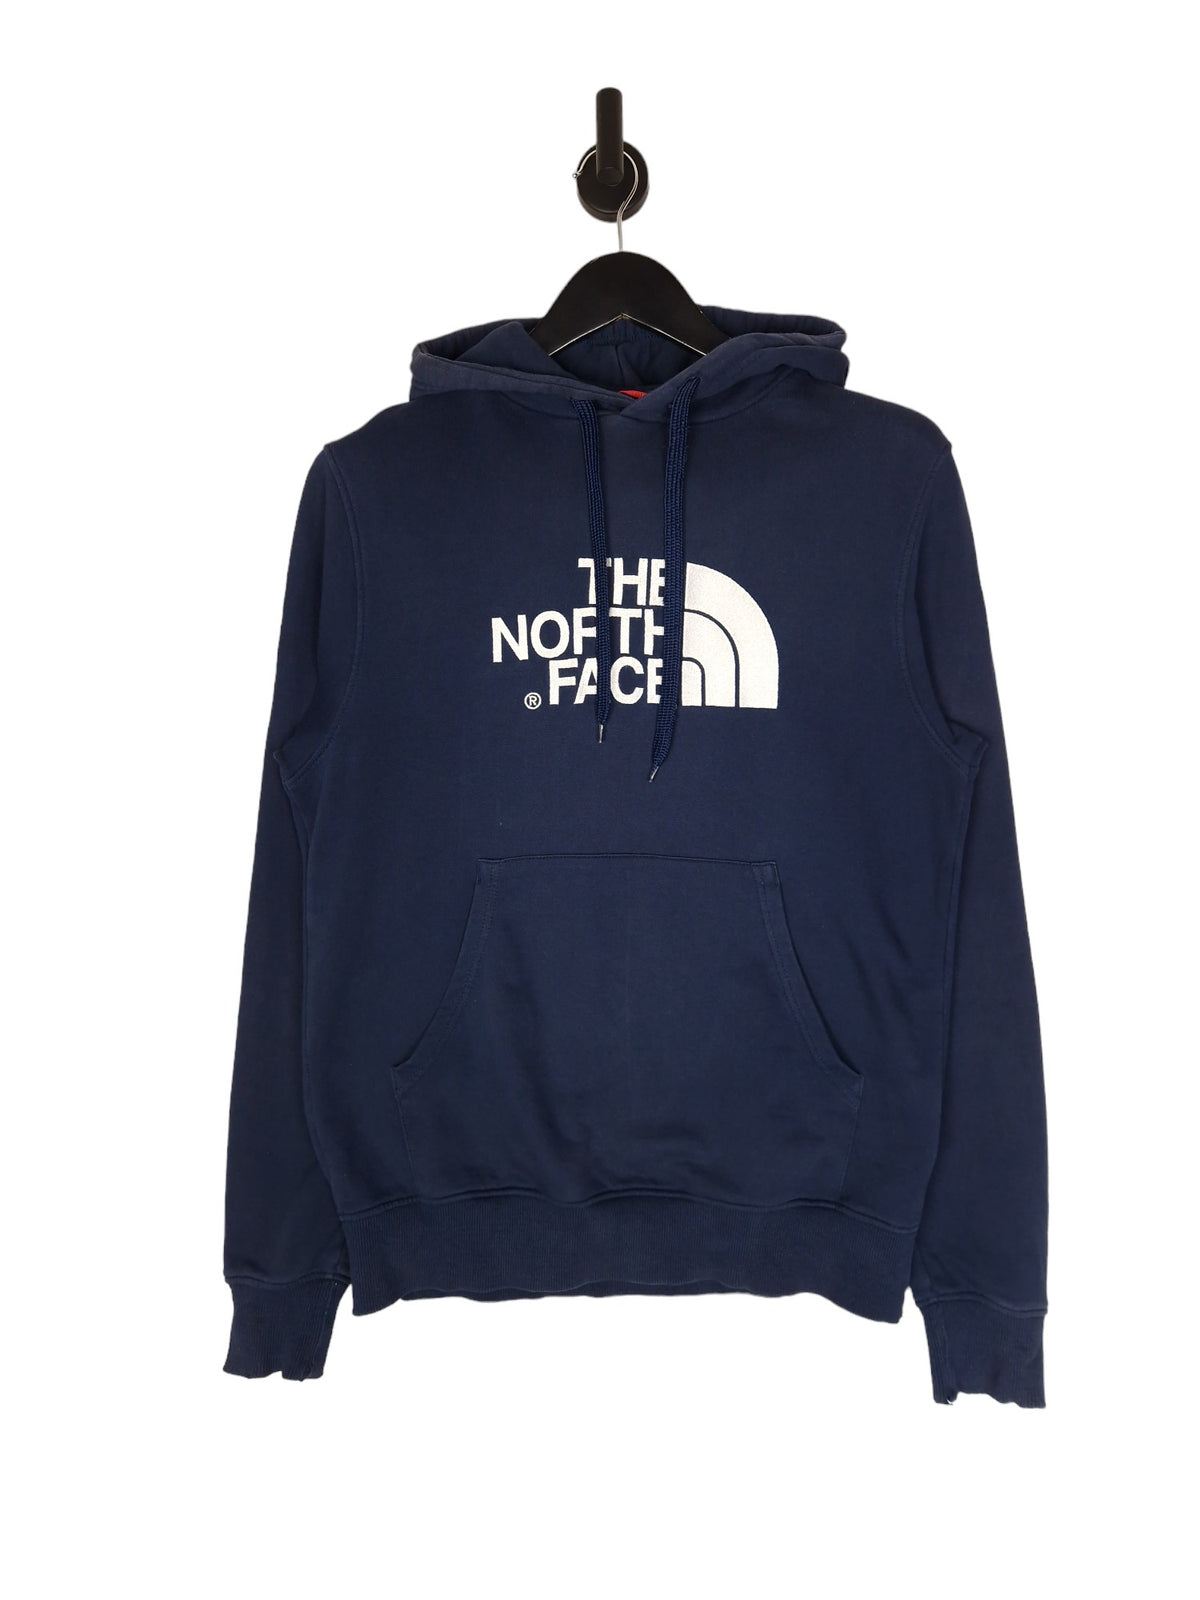 The North Face Hoodie - Size Small